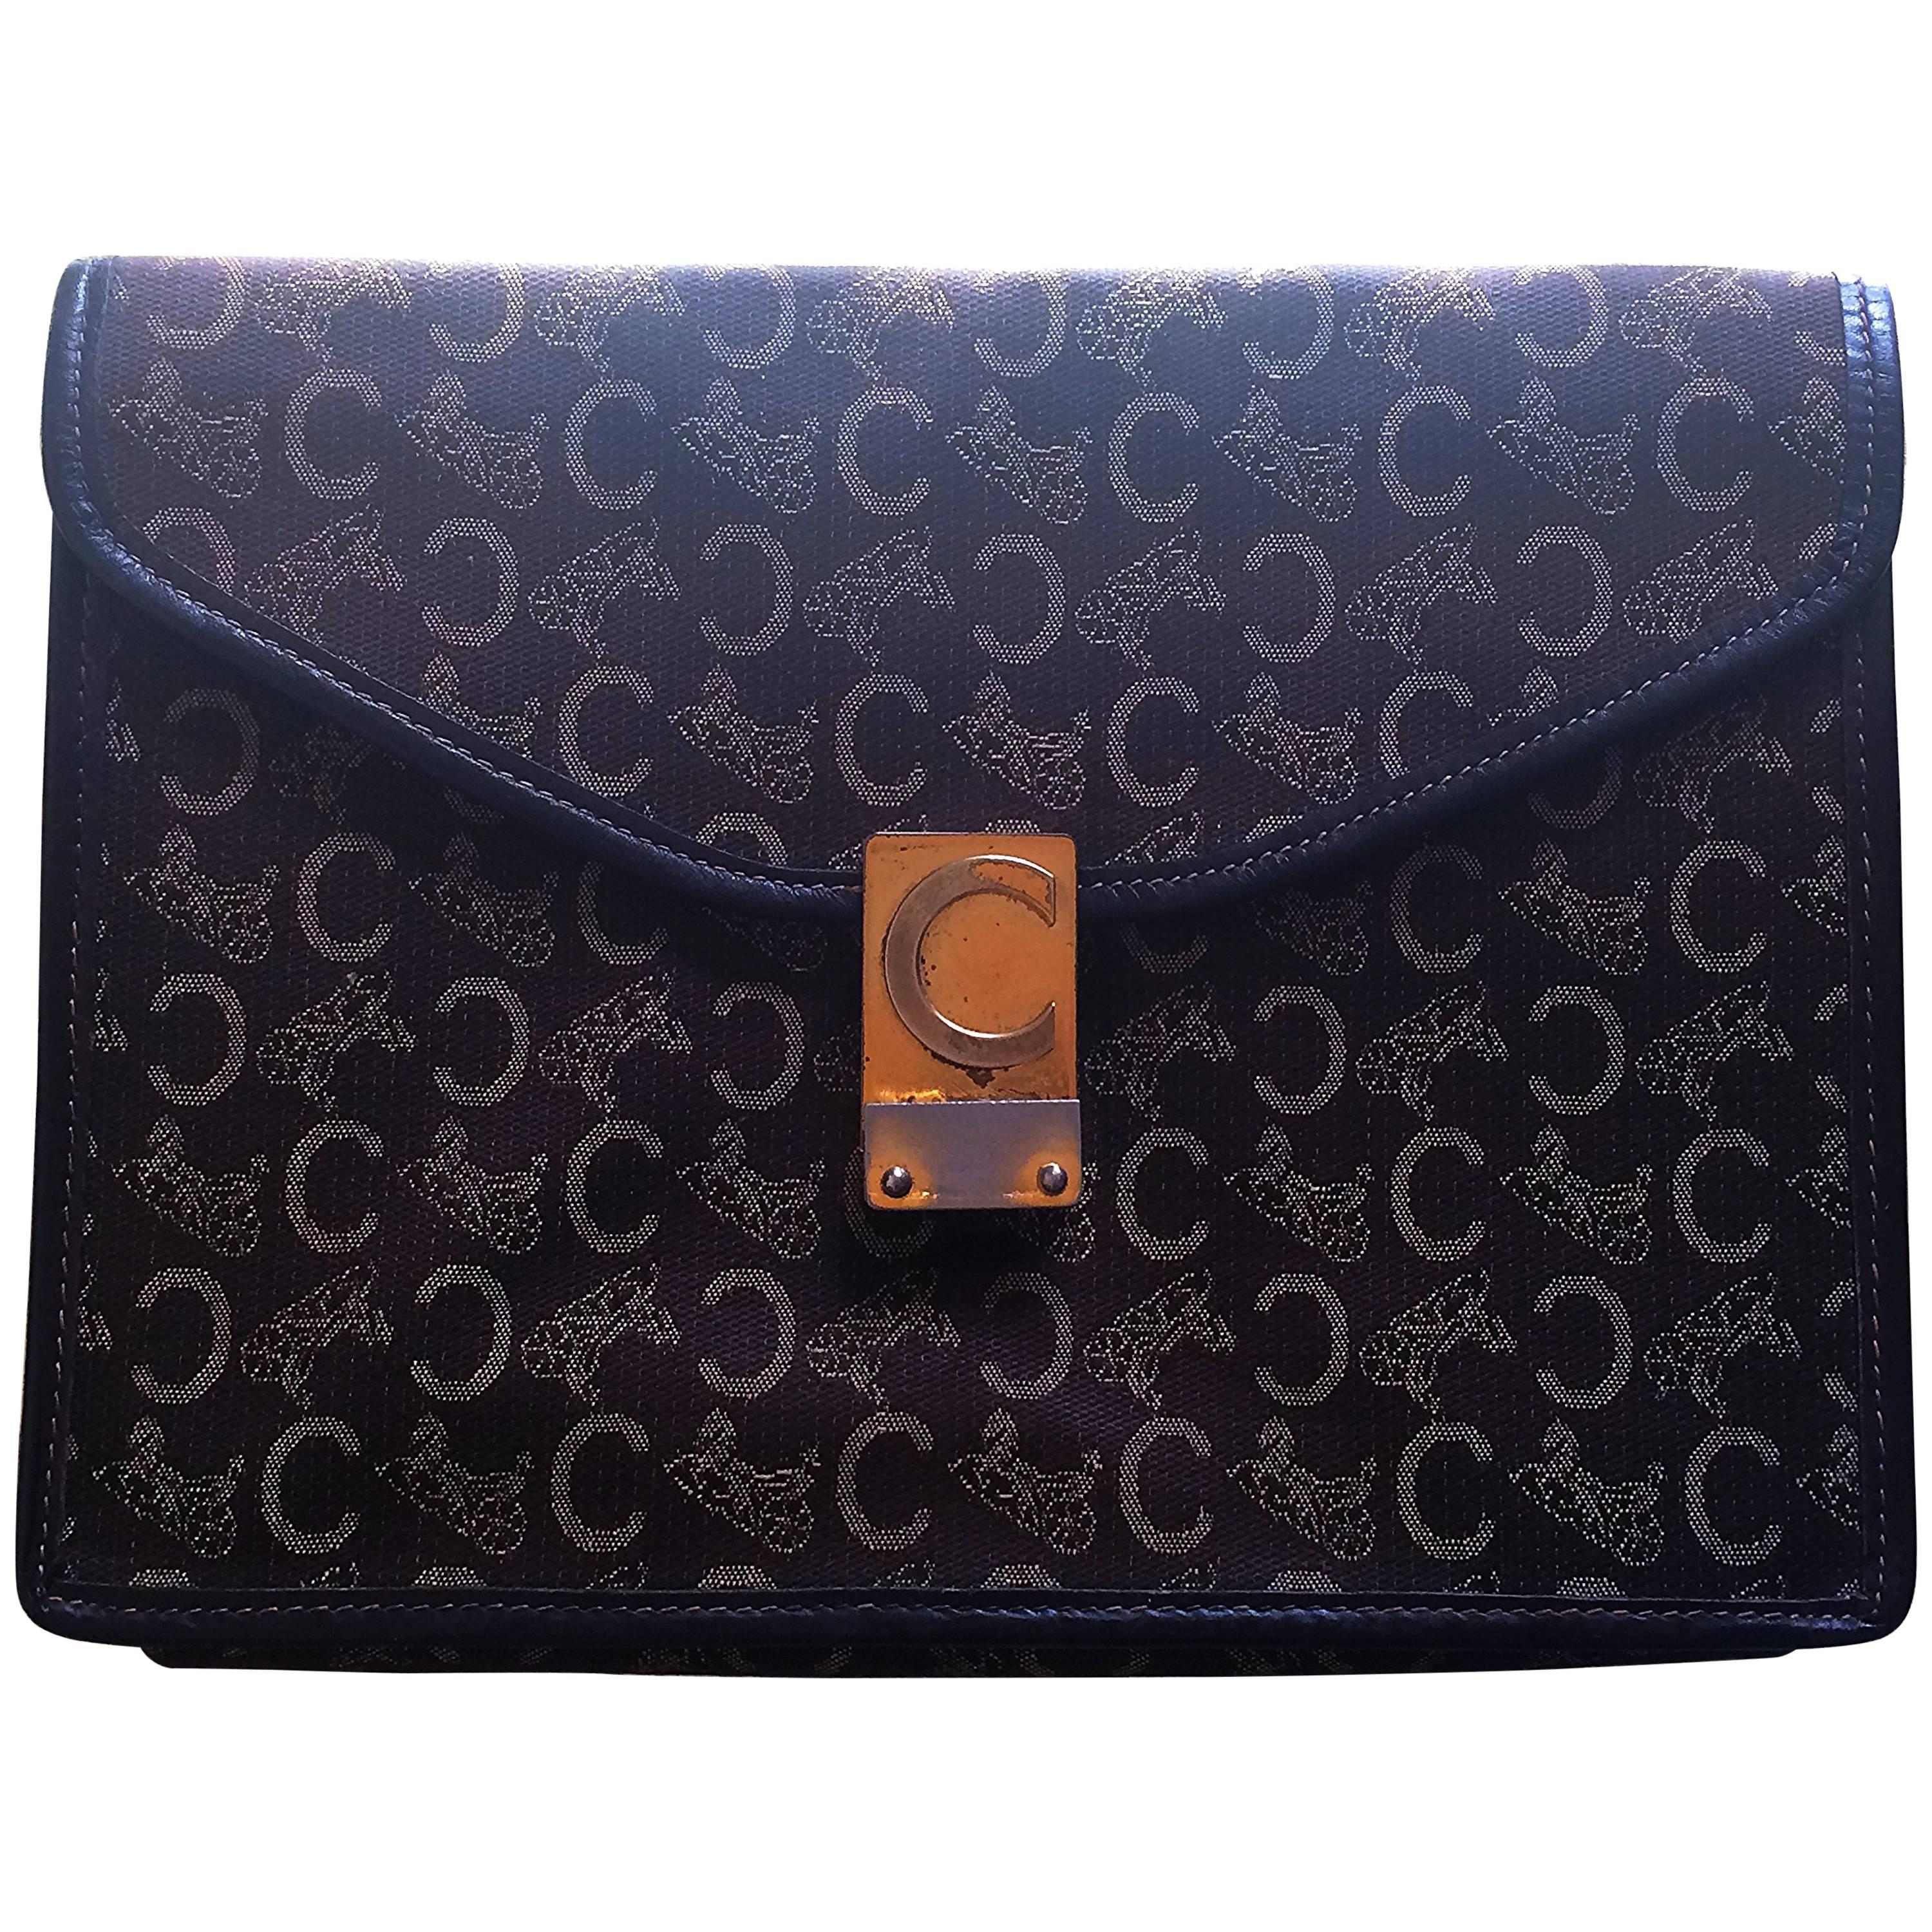 Vintage CELINE dark brown logo carriage jacquard clutch bag with leather pipings